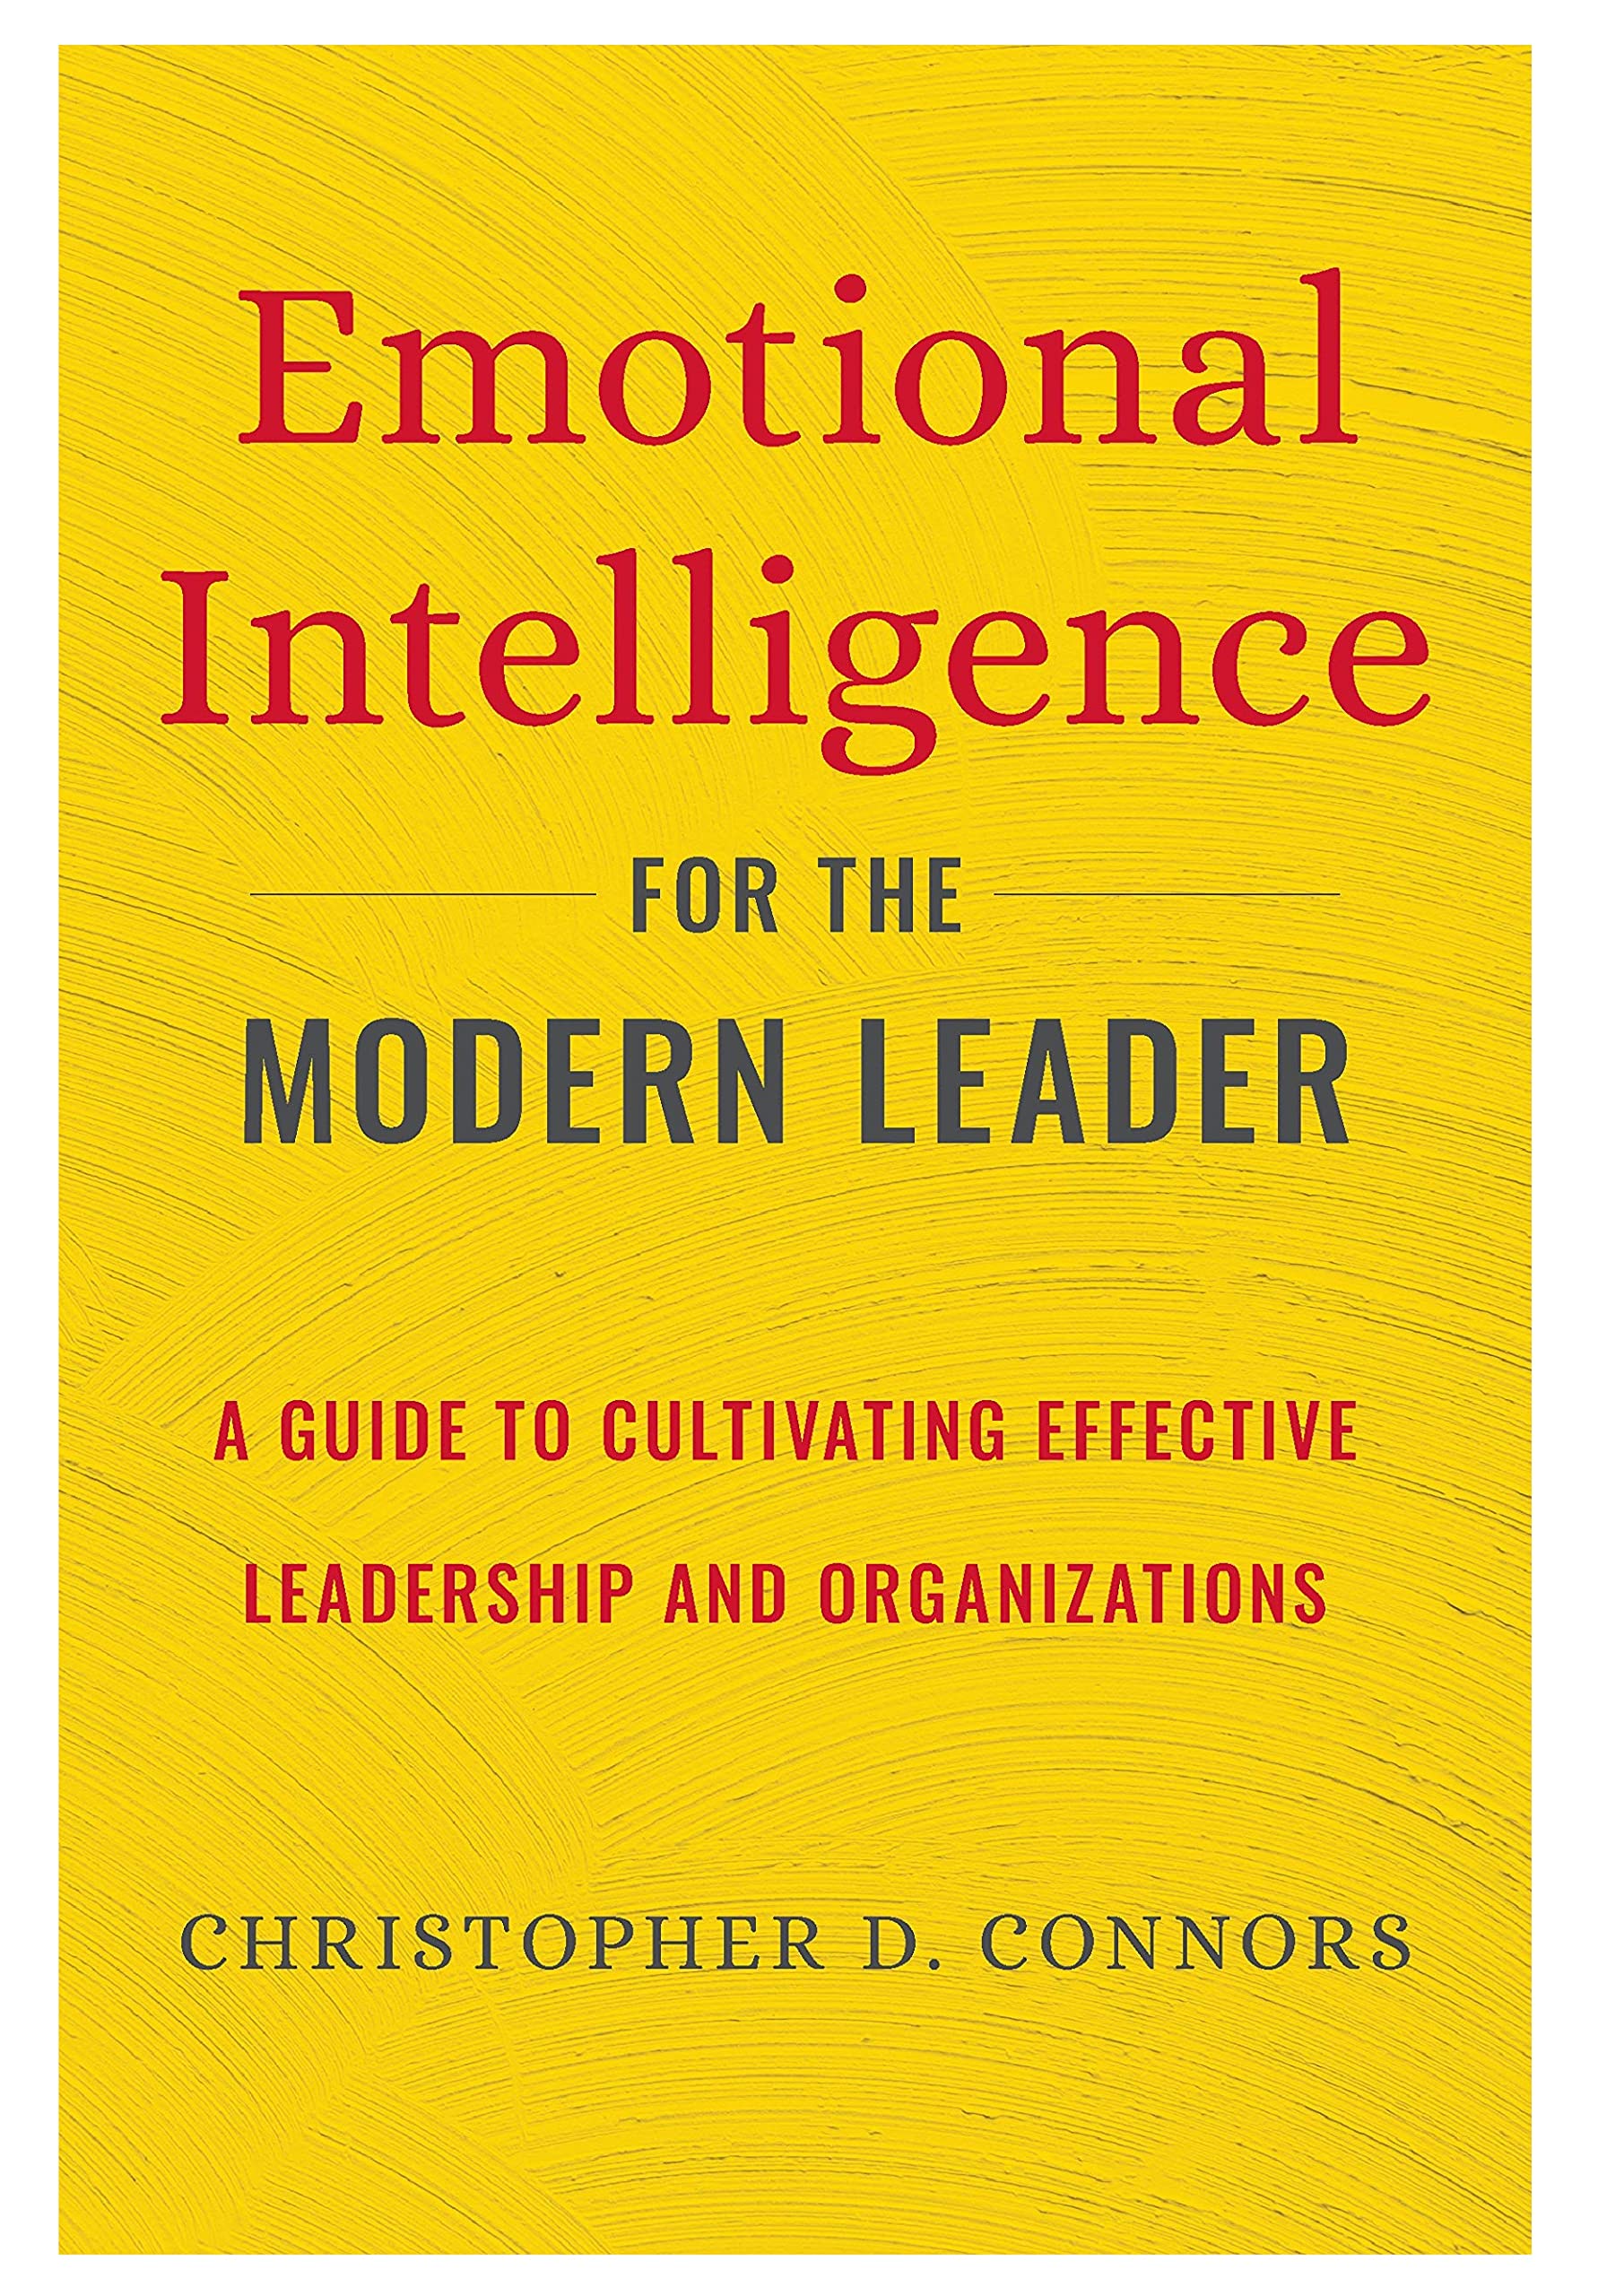 Stock image of Emotional Intelligence for the Modern Leader book